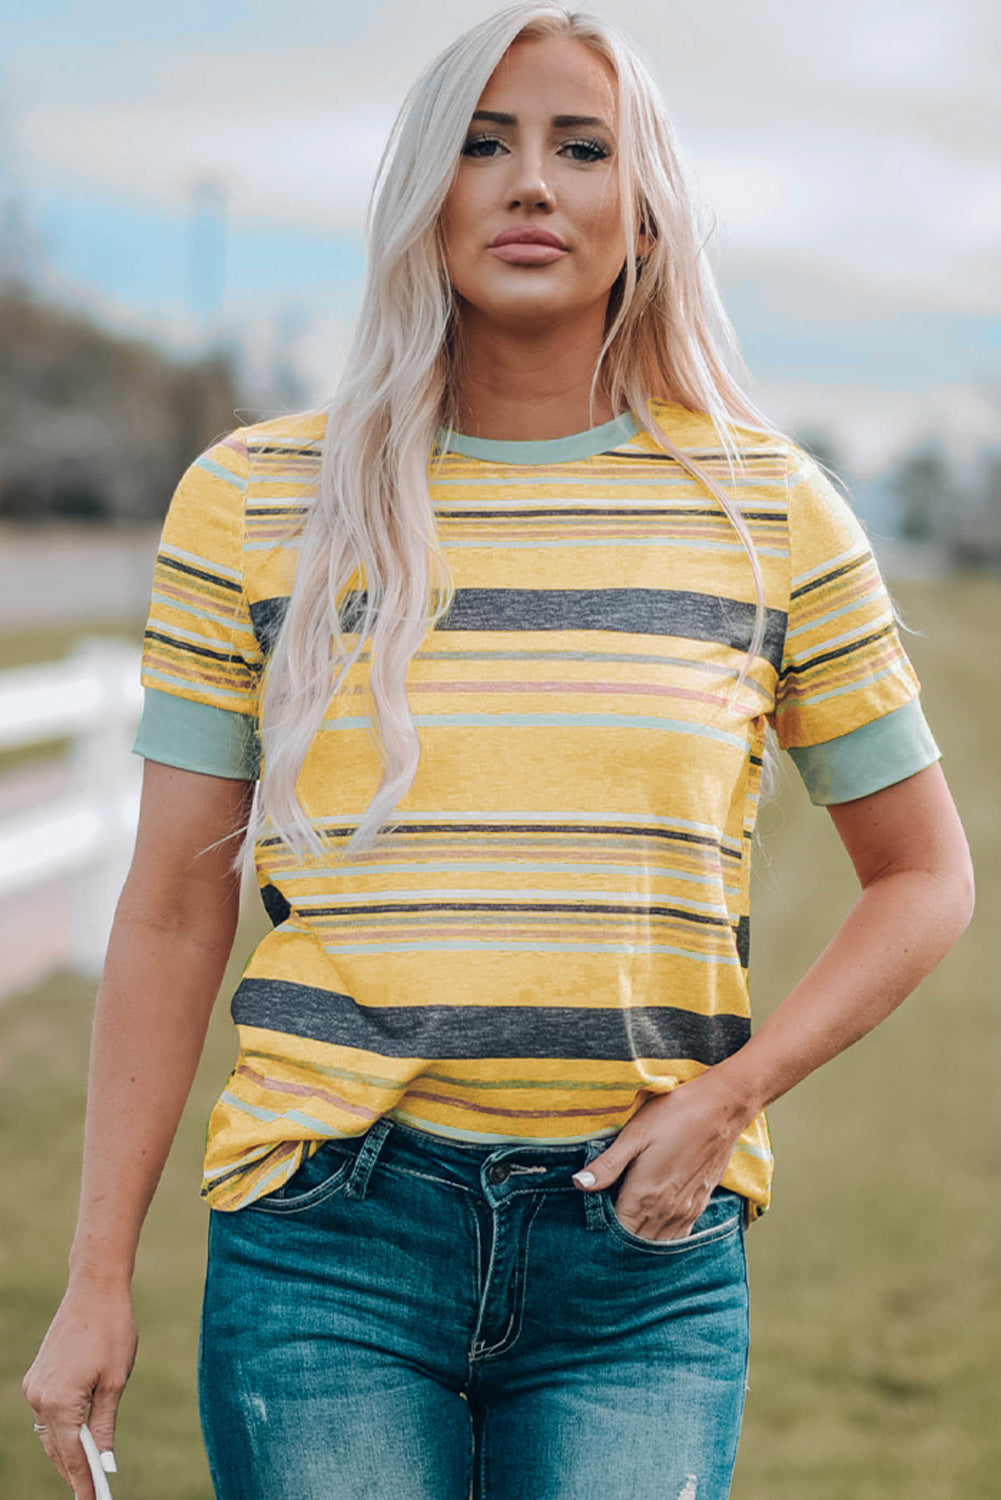 The Noon Rush Multicolored Striped Round Neck Tee Shirt